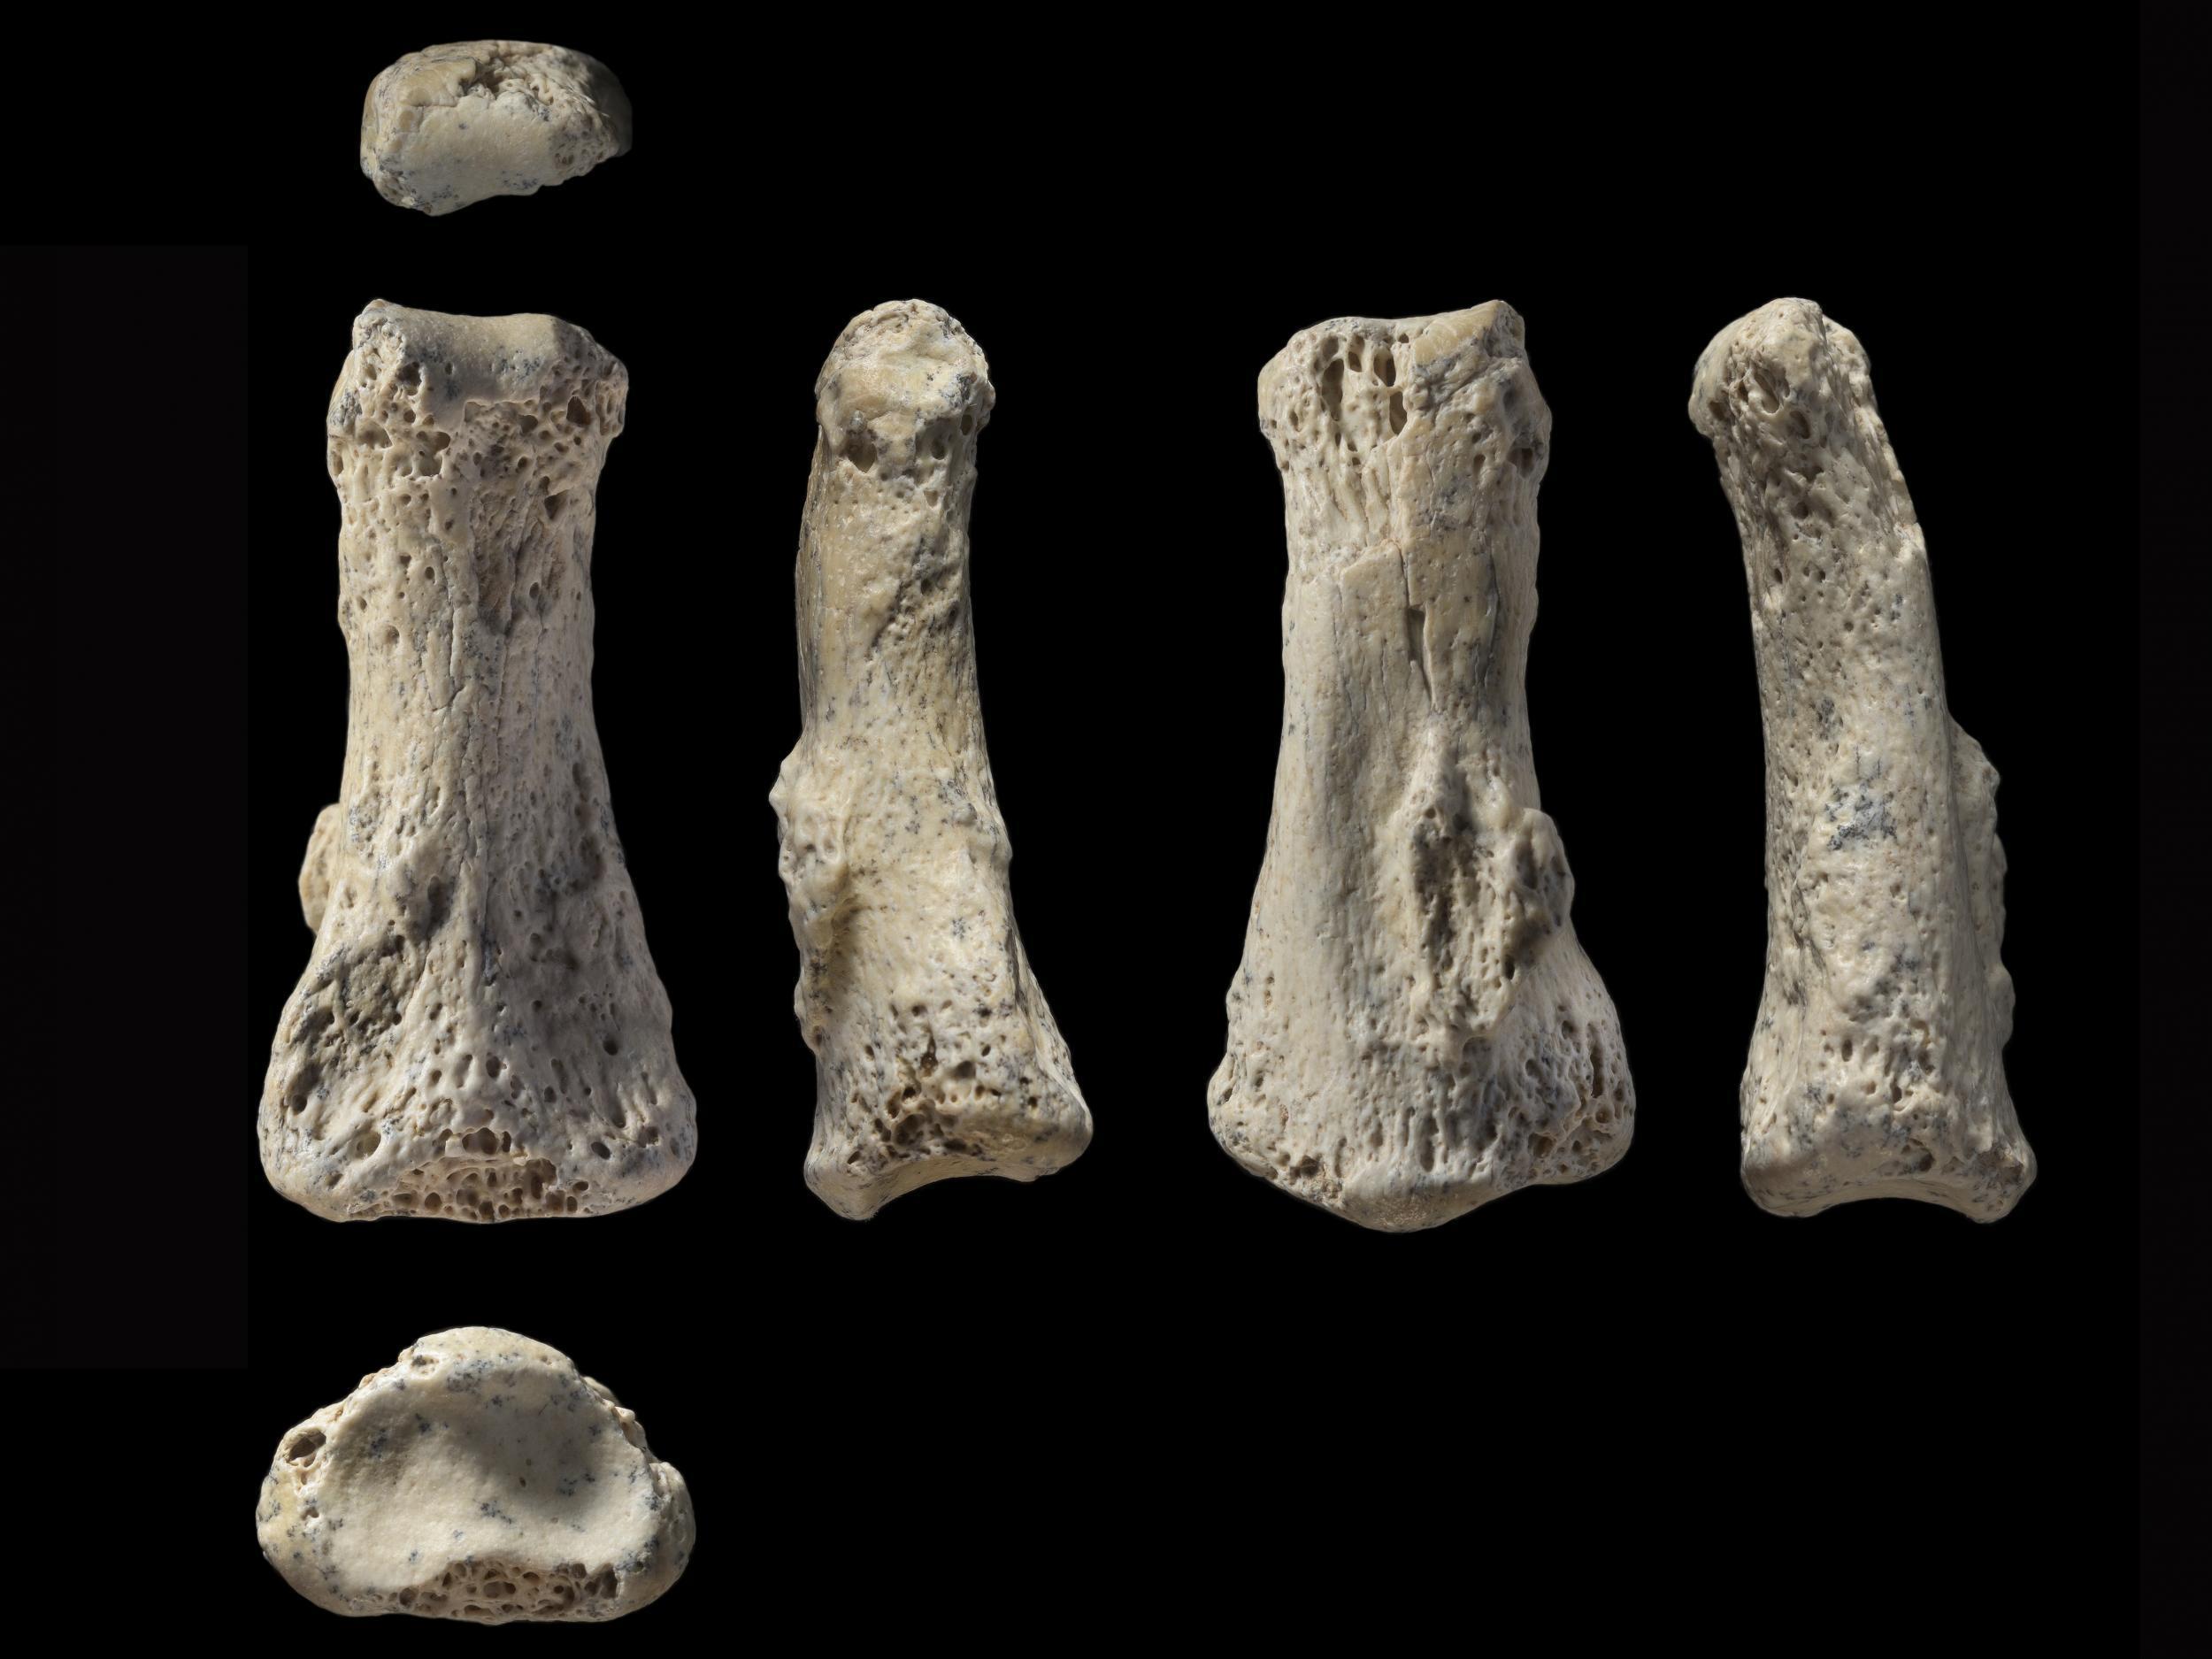 The finger bone is the oldest confirmed Homo sapiens fossil outside of Africa and the Levant